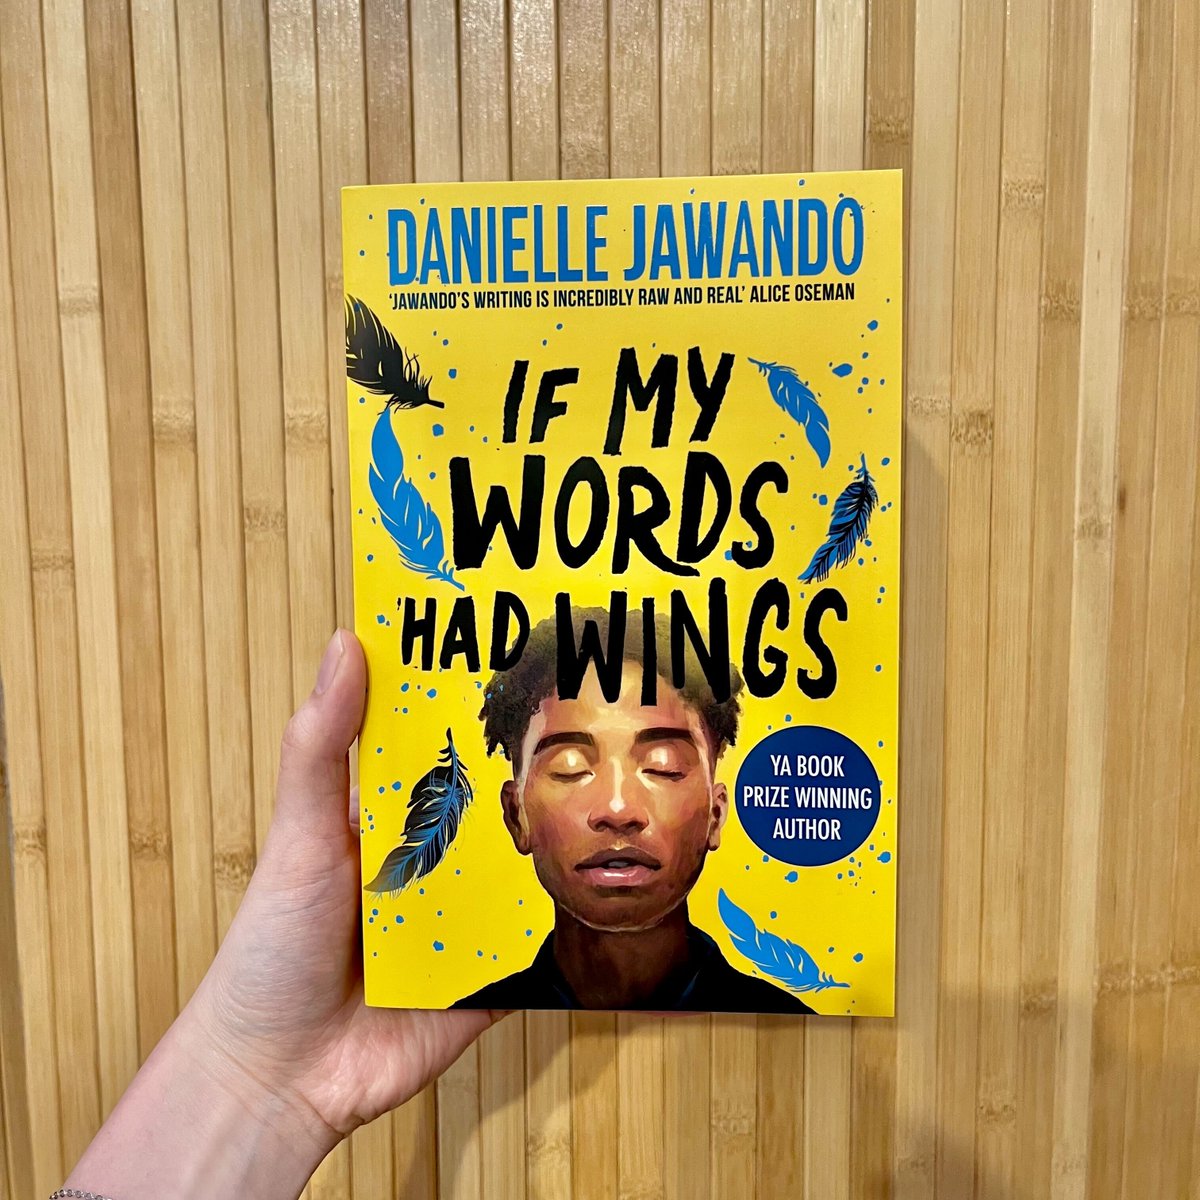 Award-winning author #DanielleJawando's new uplifting YA #IfMyWordsHadWings is out today with @simonYAbooks! 🪶

Struggling to be truly free, Tyrell Forrester finally finds his voice through spoken word after his two years sentence in young offenders’ prison. But will society